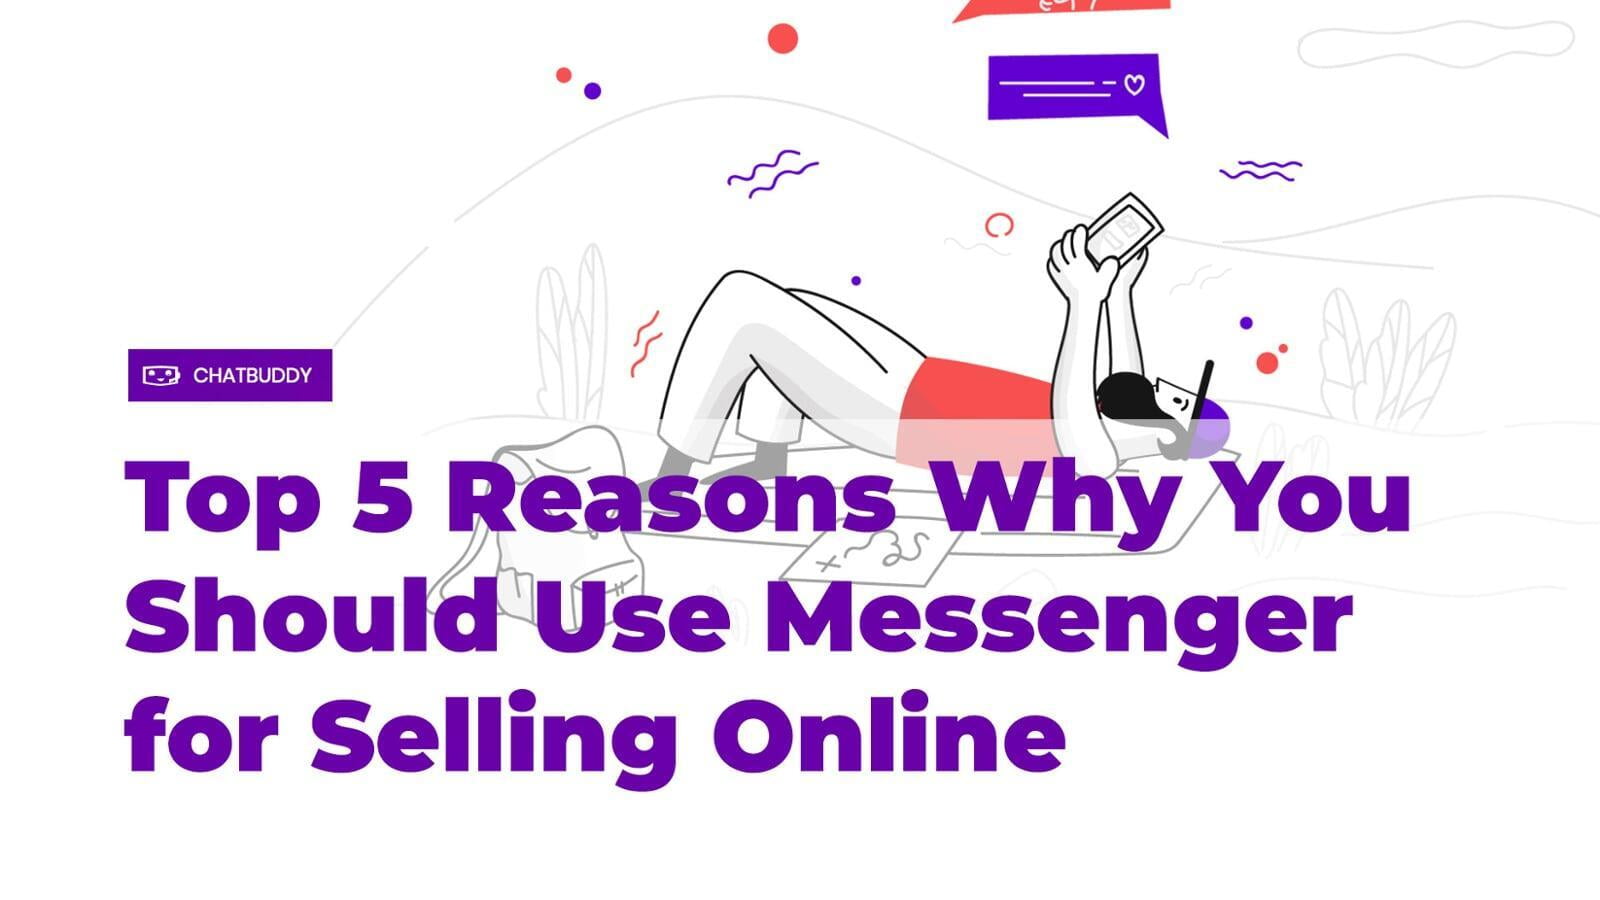 Top 5 Reasons Why You Should Use Messenger (and Not Viber) for Selling Online